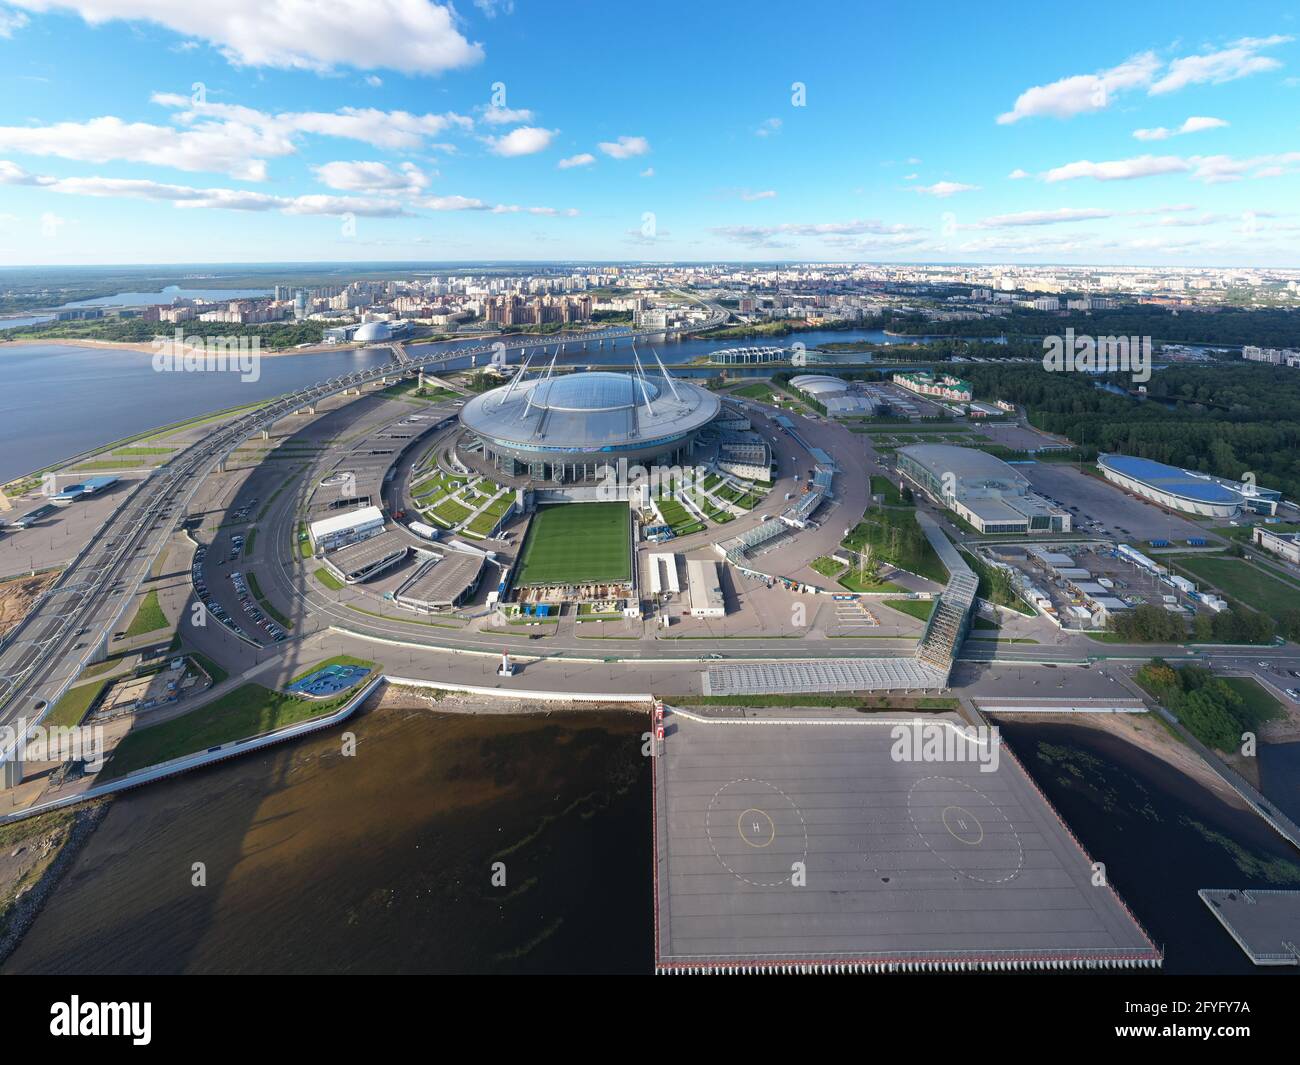 Russia, St.Petersburg, 01 September 2020: Drone point of view of new stadium Gazprom Arena, Euro 2020, retractable soccer field, skyscraper Lakhta Stock Photo